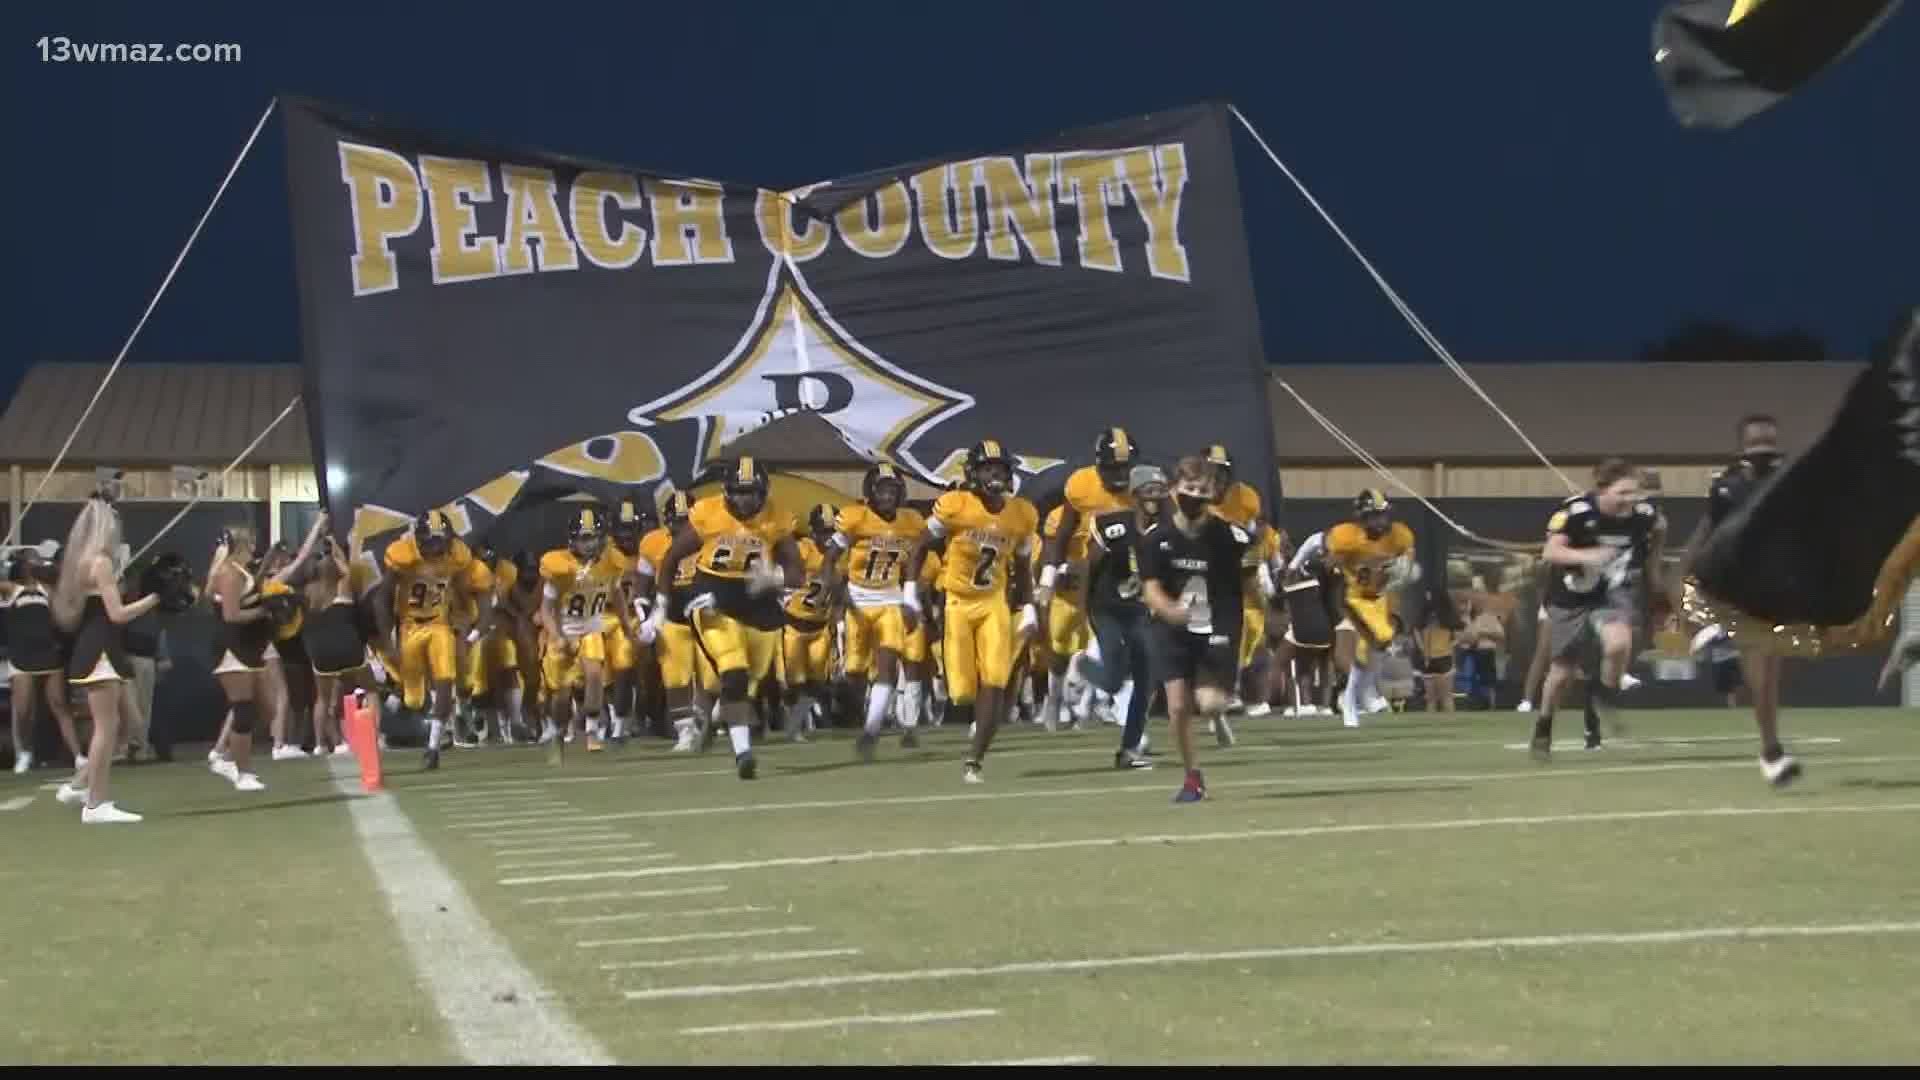 The Peach County Trojans tackling the Crisp County Cougars. Two very strong defenses, it should be a great atmosphere at the Cougar Den.